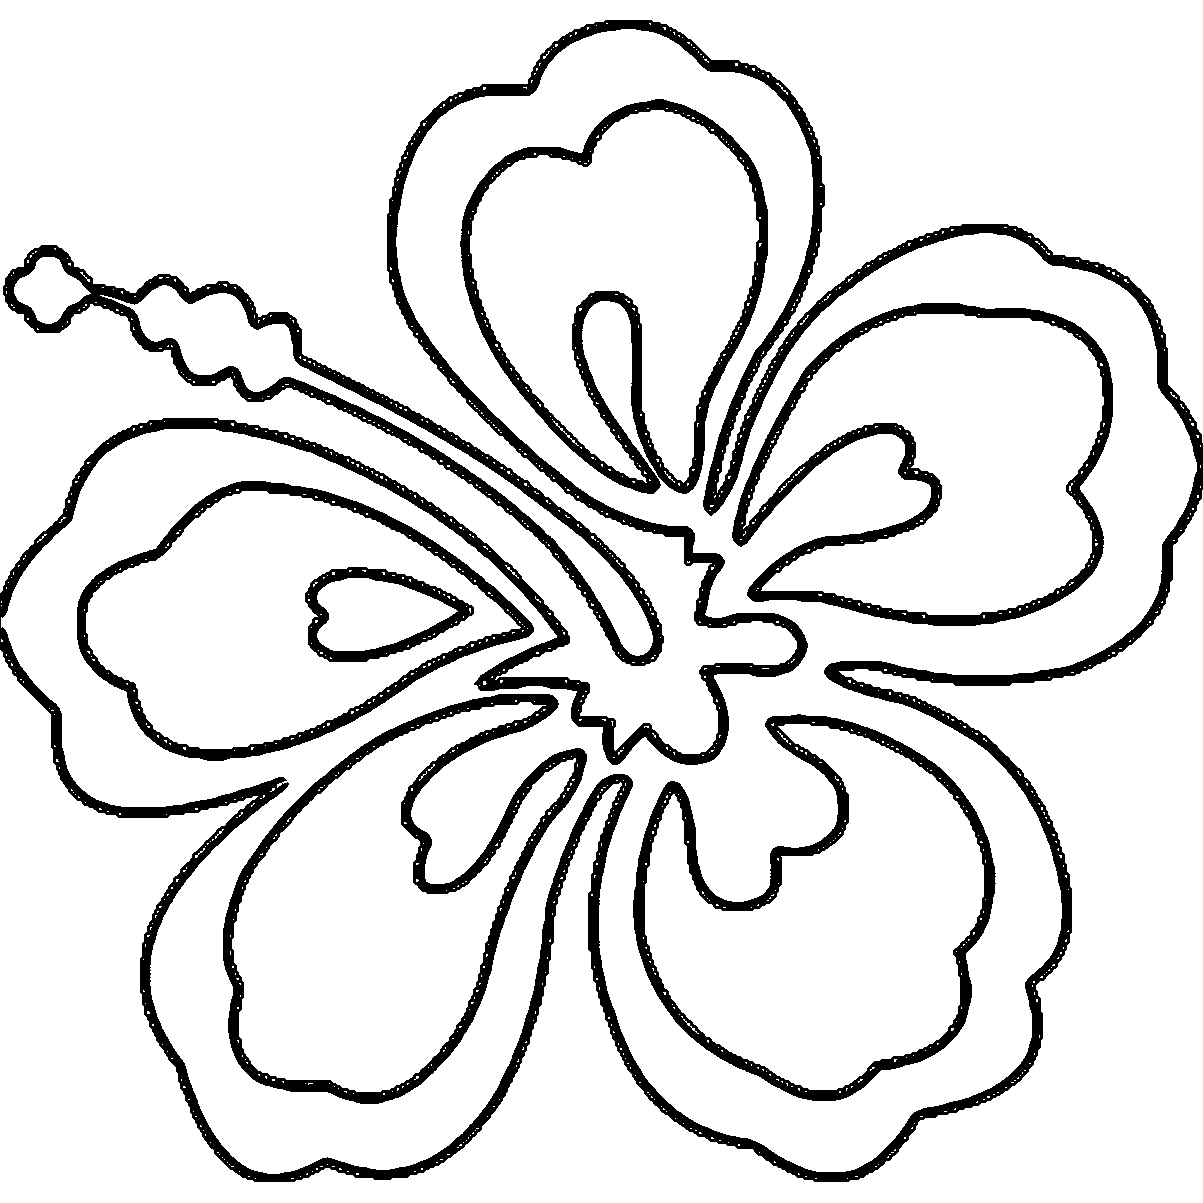 Free Coloring Pages About Hawaii, Download Free Clip Art, Free Clip Art on  Clipart Library